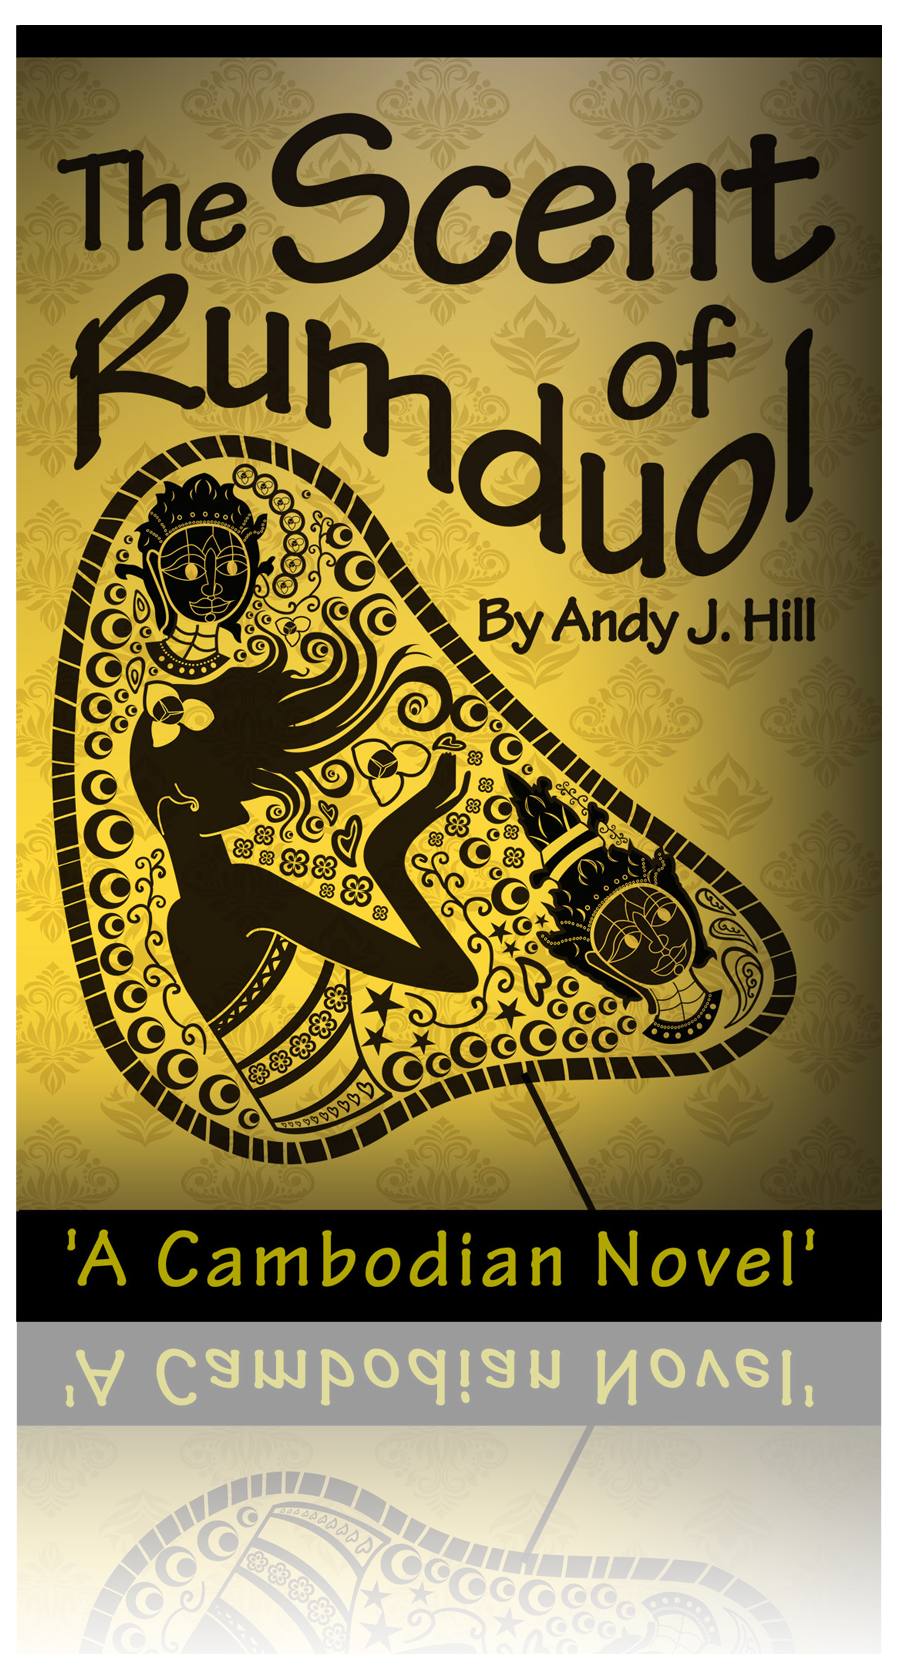 The Scent of Rumduol by Andy J. Hill